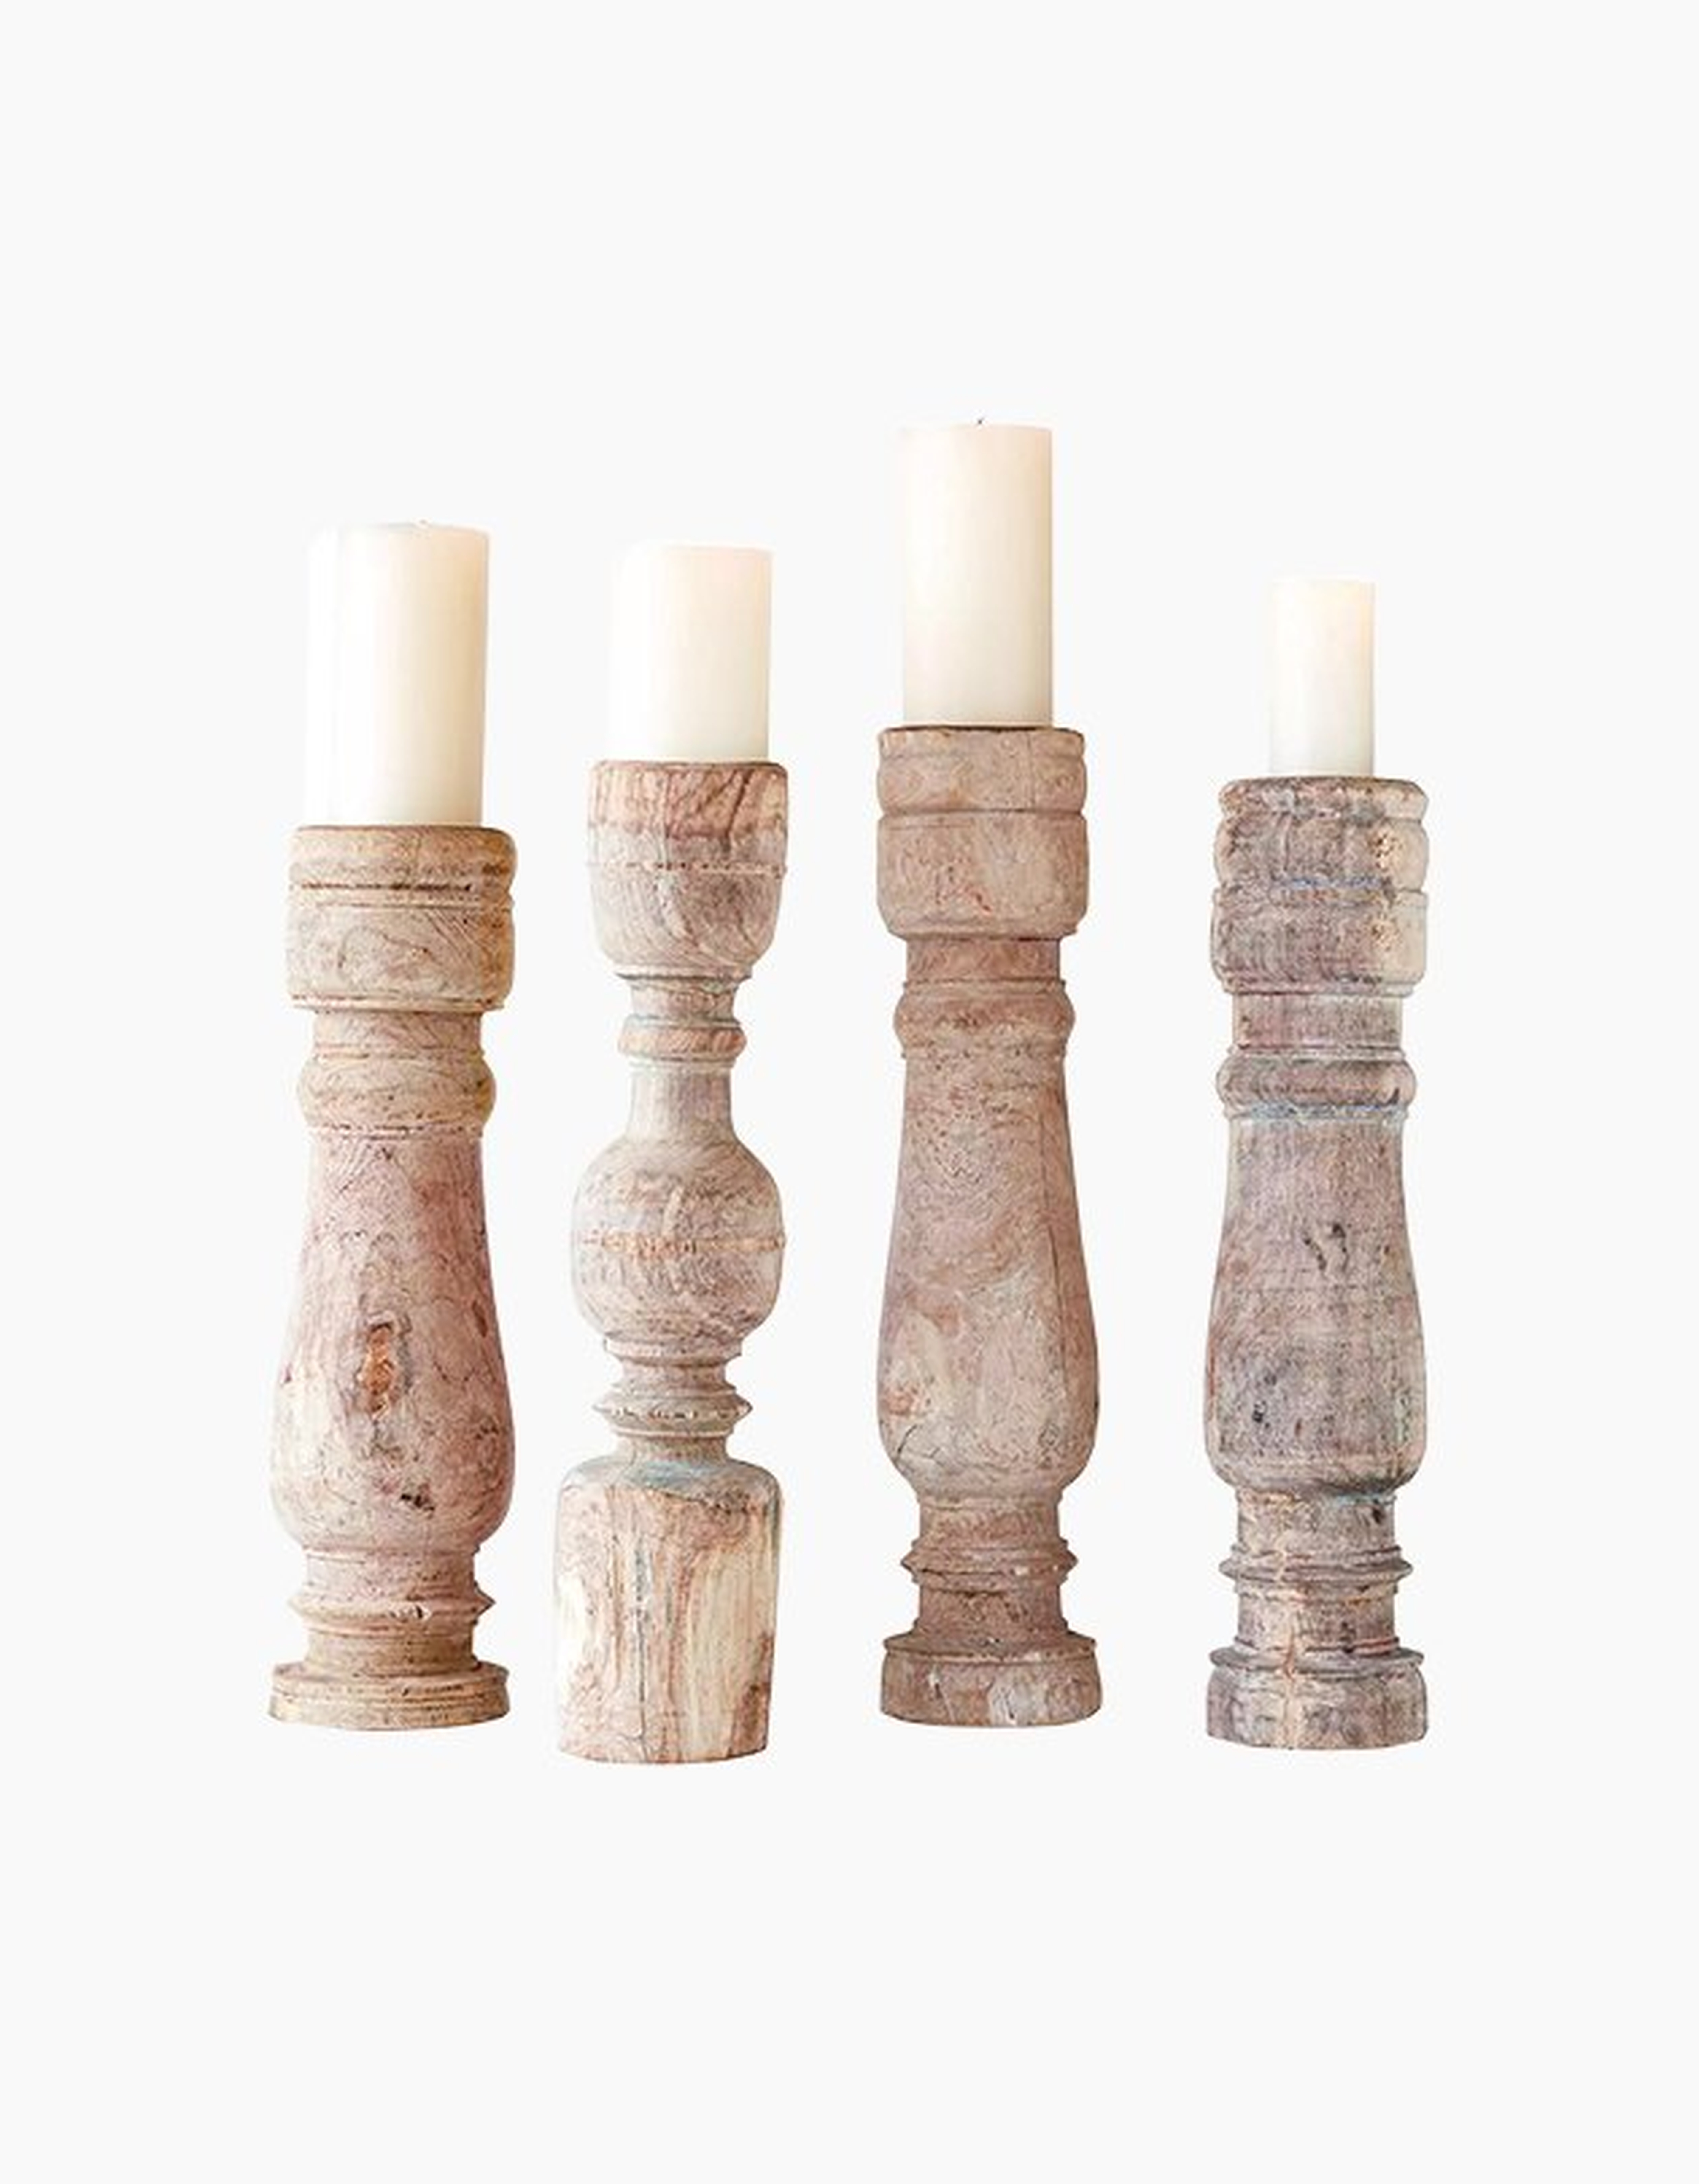 Kamiyah Found Candleholder (Includes 1 Candle Holder, Each One Will Vary) - Roam Common